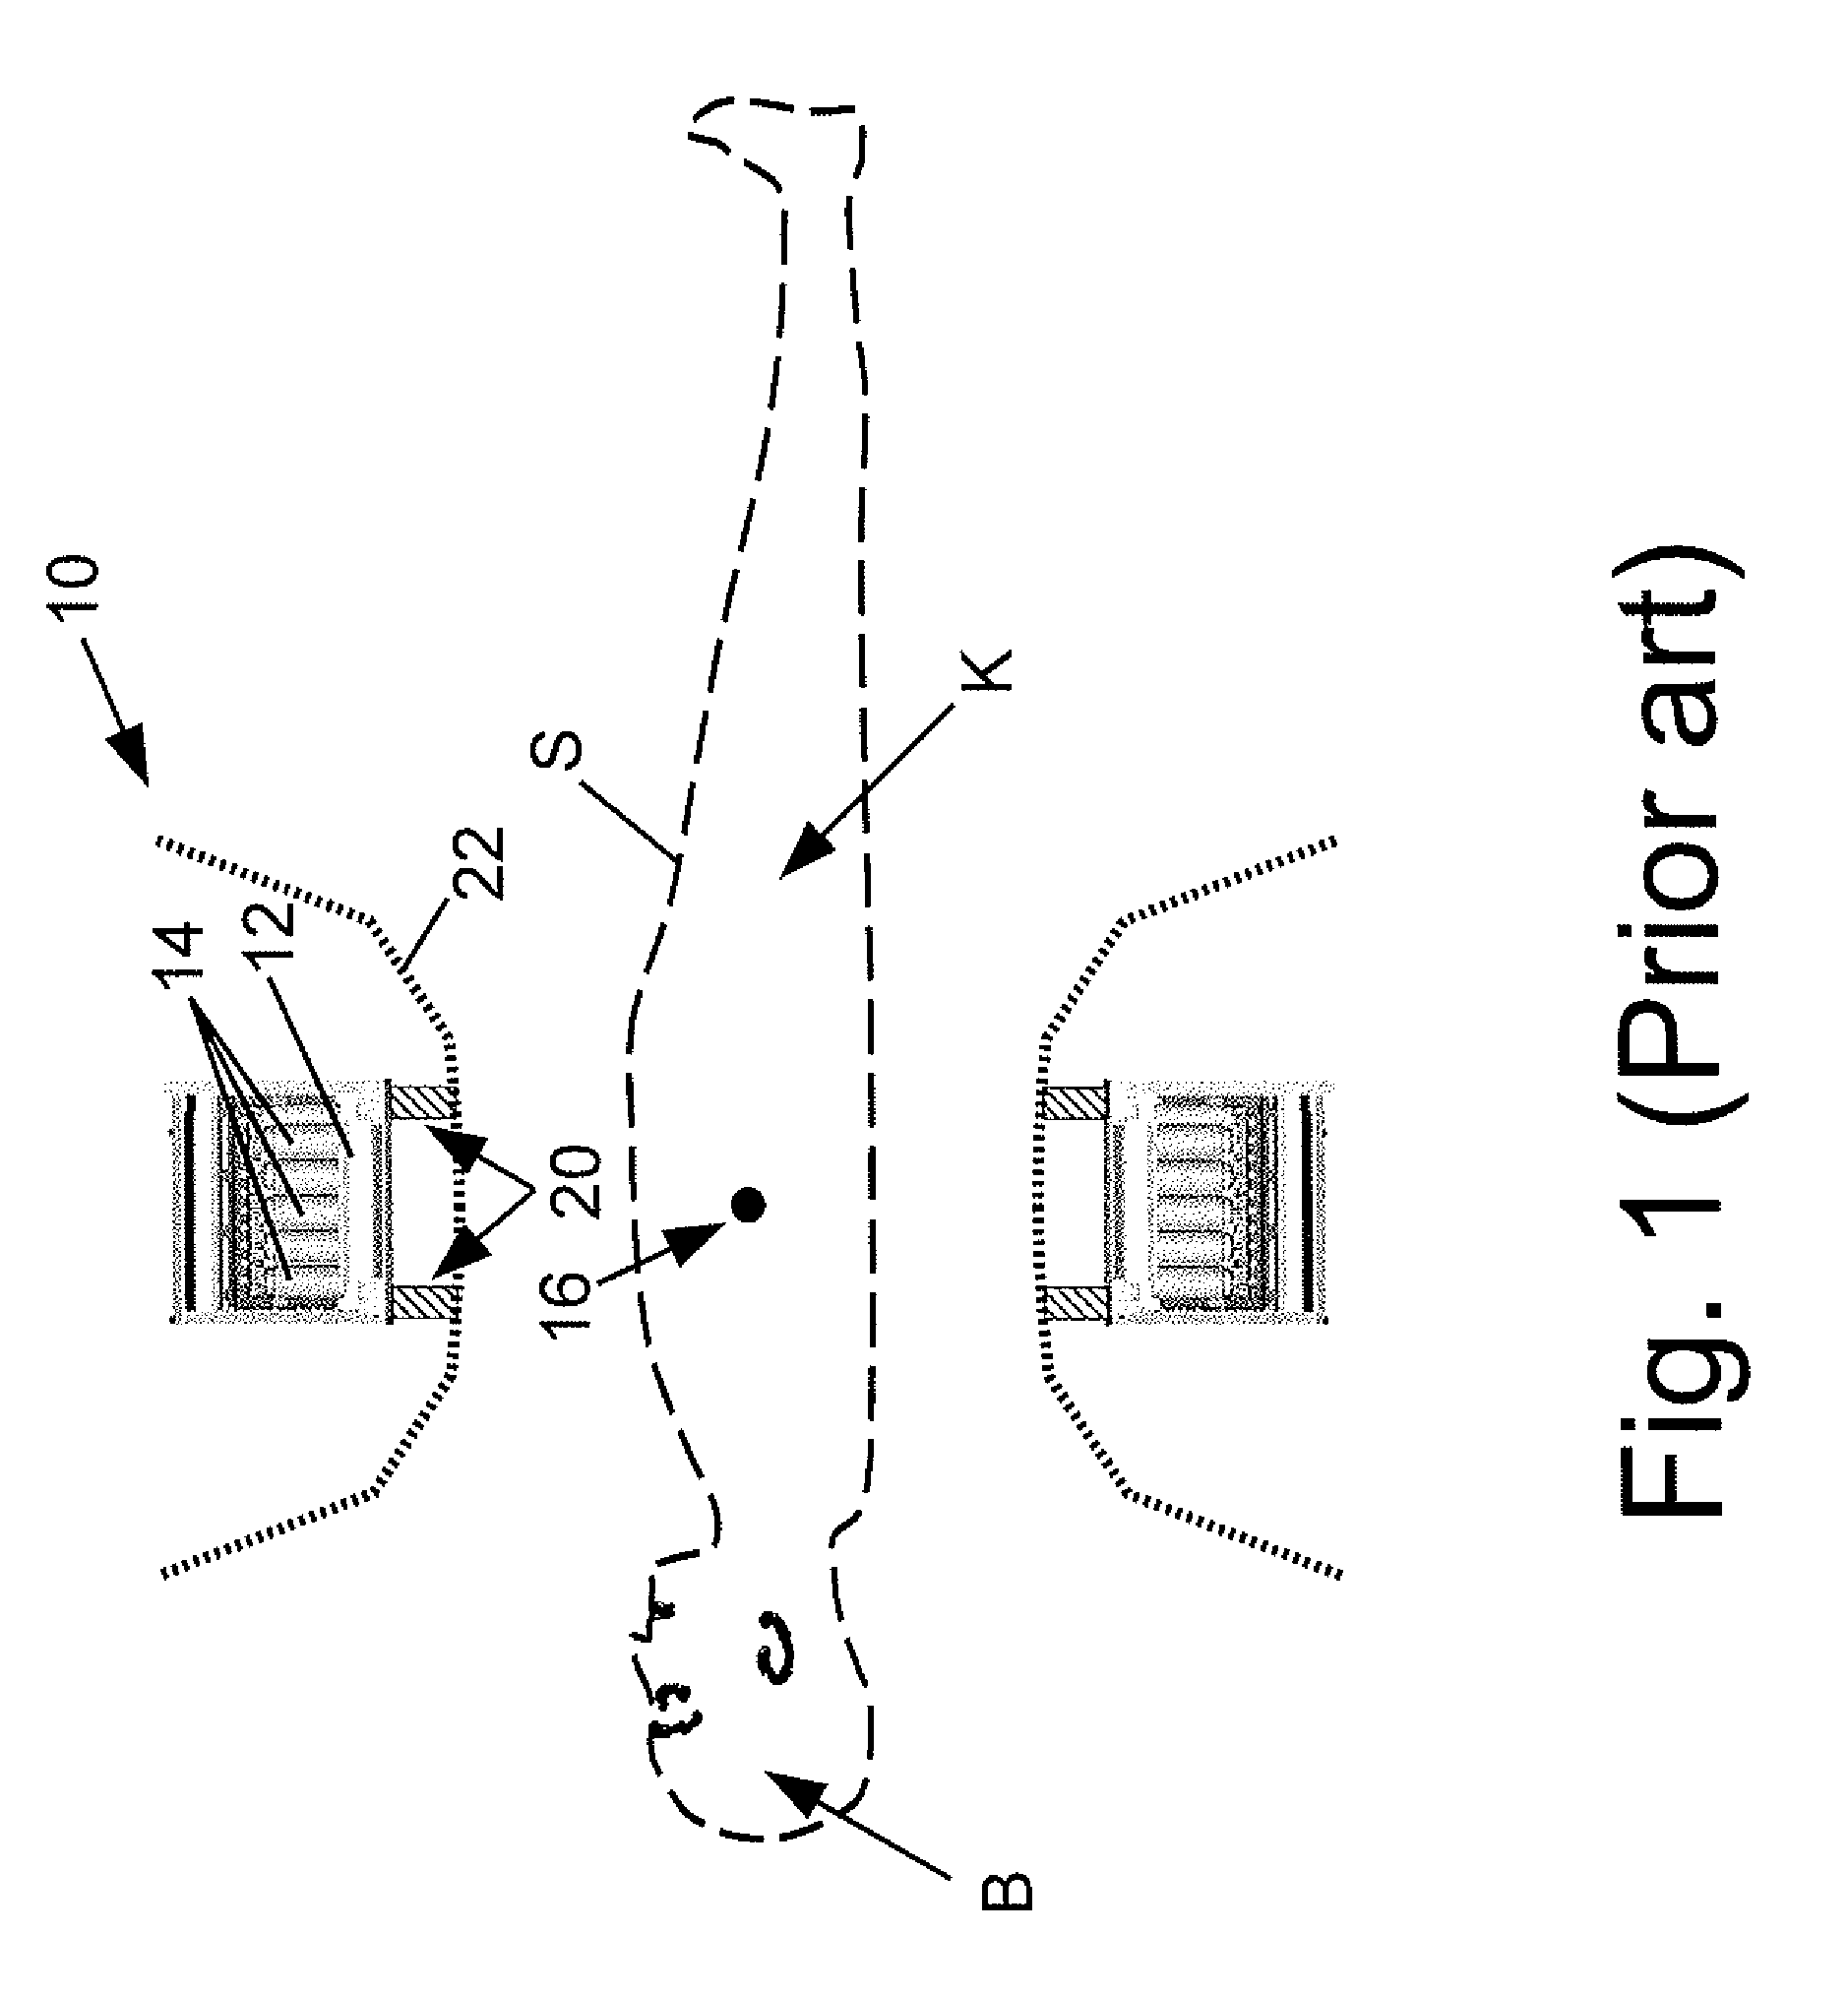 Large bore PET and hybrid PET/CT scanners and radiation therapy planning using same